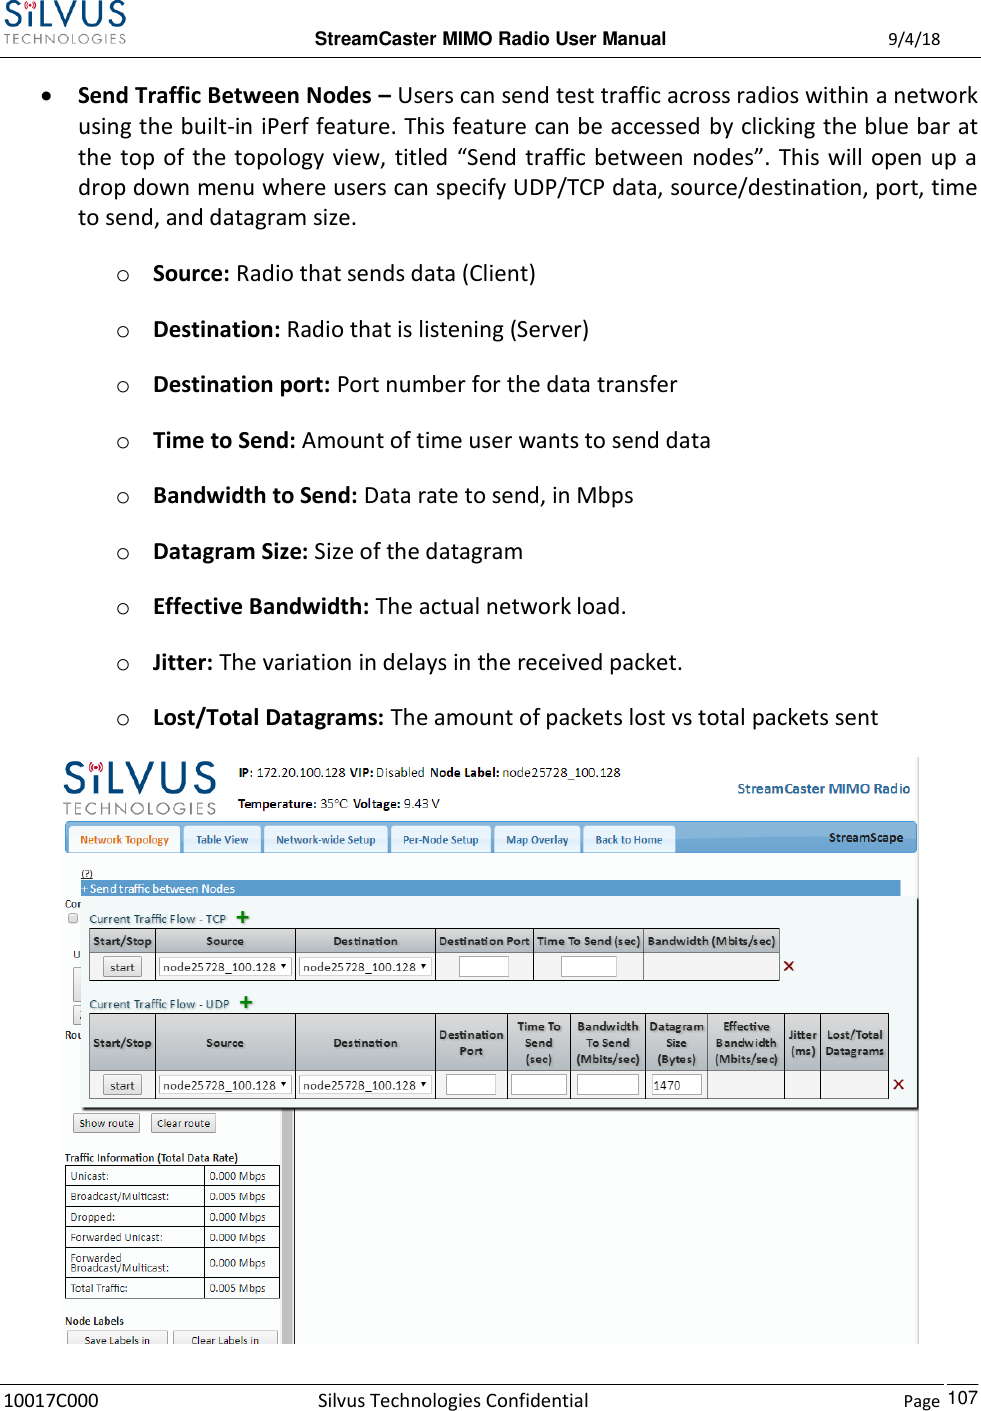  StreamCaster MIMO Radio User Manual  9/4/18 10017C000 Silvus Technologies Confidential    Page    107  Send Traffic Between Nodes – Users can send test traffic across radios within a network using the built-in iPerf feature. This feature can be accessed by clicking the blue bar at the top of the topology view,  titled “Send  traffic between nodes”.  This will open up a drop down menu where users can specify UDP/TCP data, source/destination, port, time to send, and datagram size. o Source: Radio that sends data (Client) o Destination: Radio that is listening (Server) o Destination port: Port number for the data transfer o Time to Send: Amount of time user wants to send data o Bandwidth to Send: Data rate to send, in Mbps o Datagram Size: Size of the datagram o Effective Bandwidth: The actual network load.  o Jitter: The variation in delays in the received packet. o Lost/Total Datagrams: The amount of packets lost vs total packets sent  